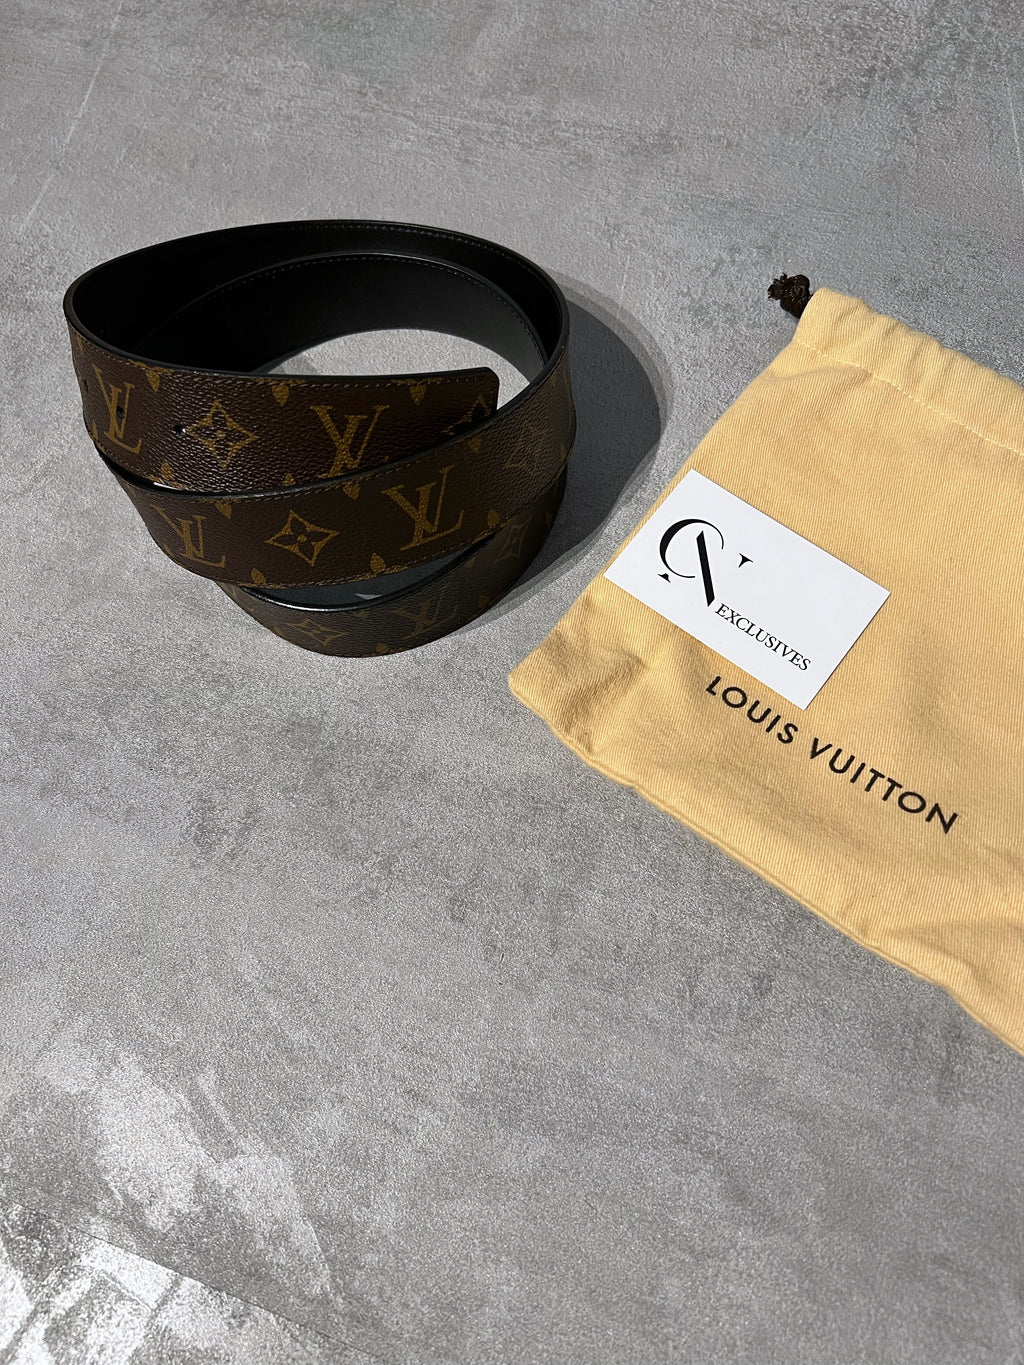 Copley Place - The versatile Louis Vuitton Bumbag defines casual chic. Wear  it as a belt bag, cross-body or over the shoulder for a jauntier look.  #LouisVuitton #FoundAtSimon